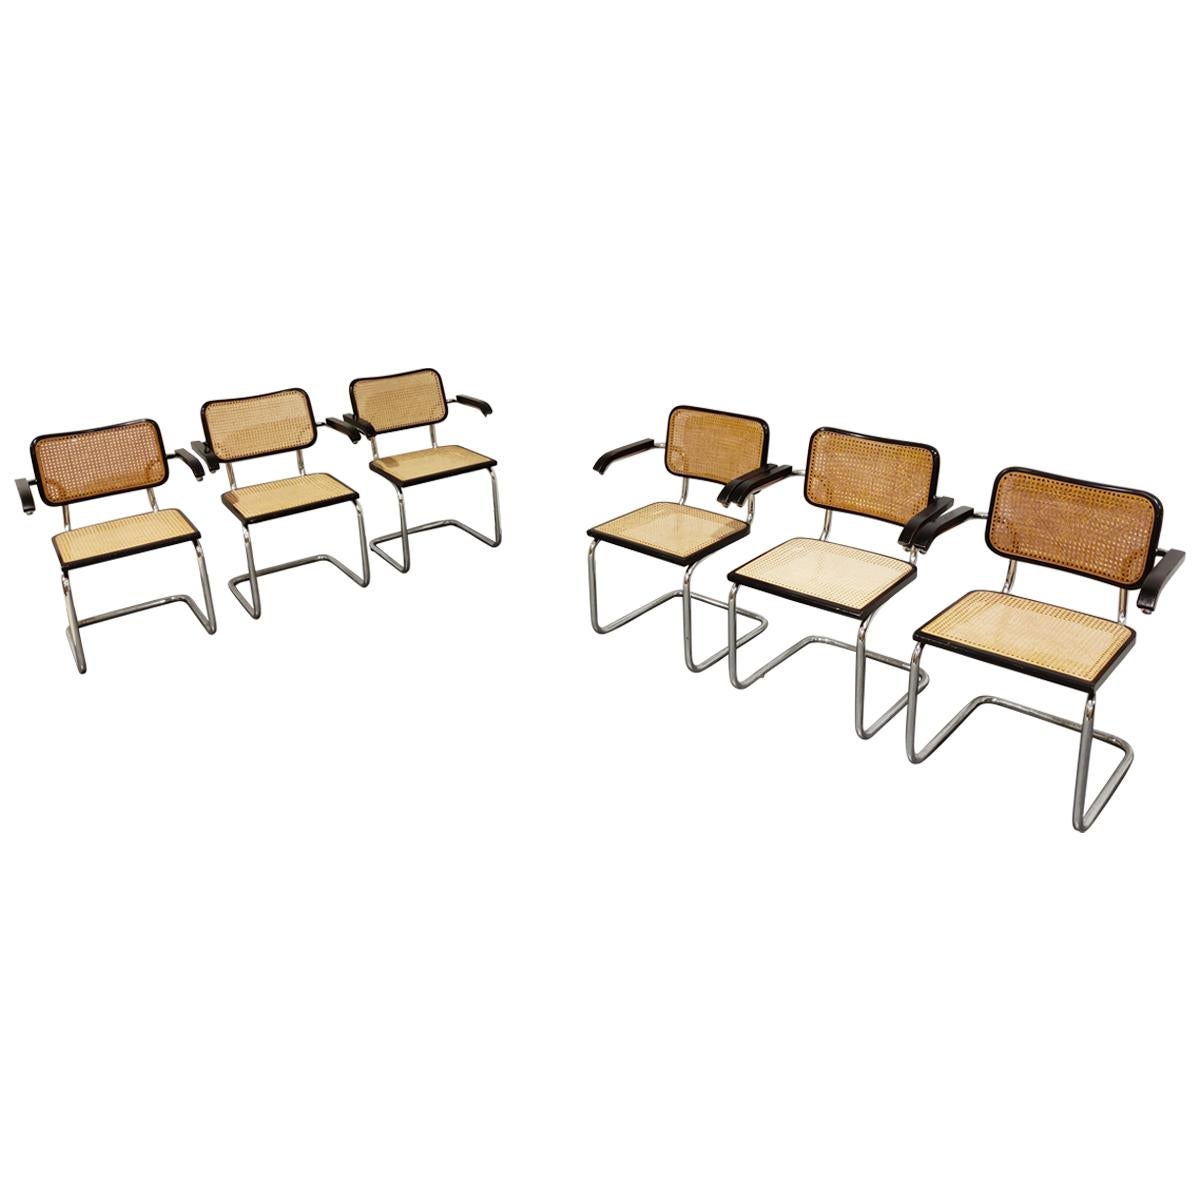 Vintage Marcel Breuer Cesca B64 Chairs, Made in Italy, 1970s 'Set of 6'